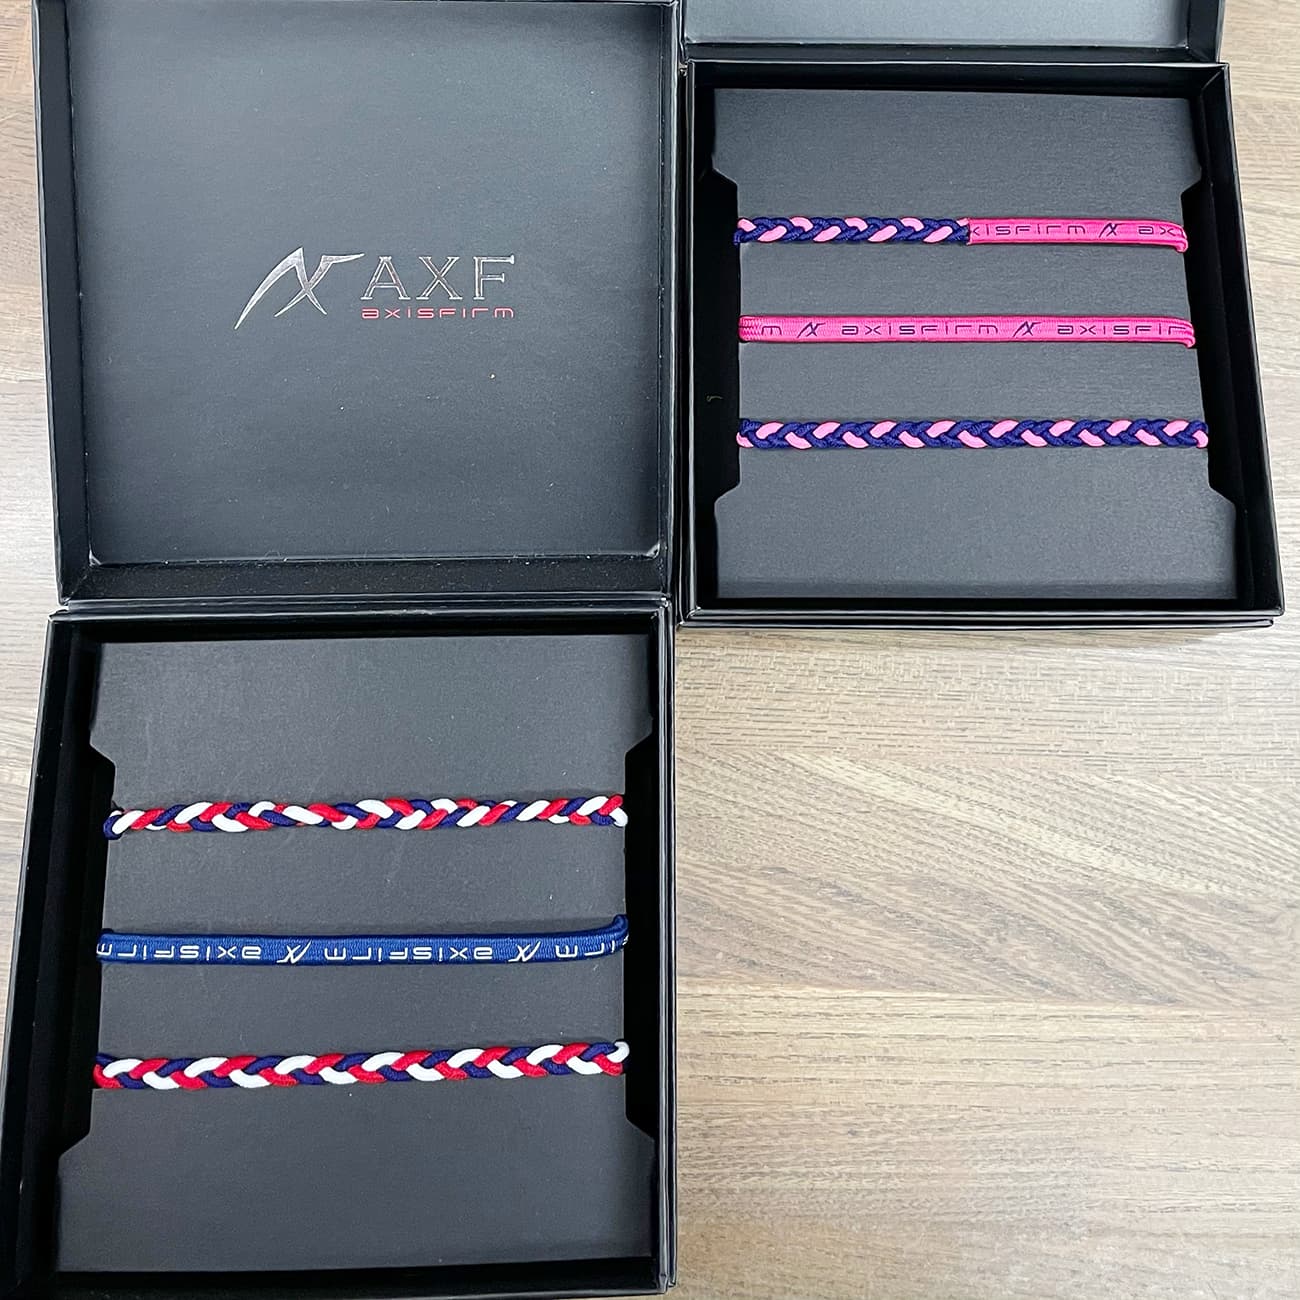 AXF（AXISFIRM）アクセフ　COLOR BAND（カラーバンド）3